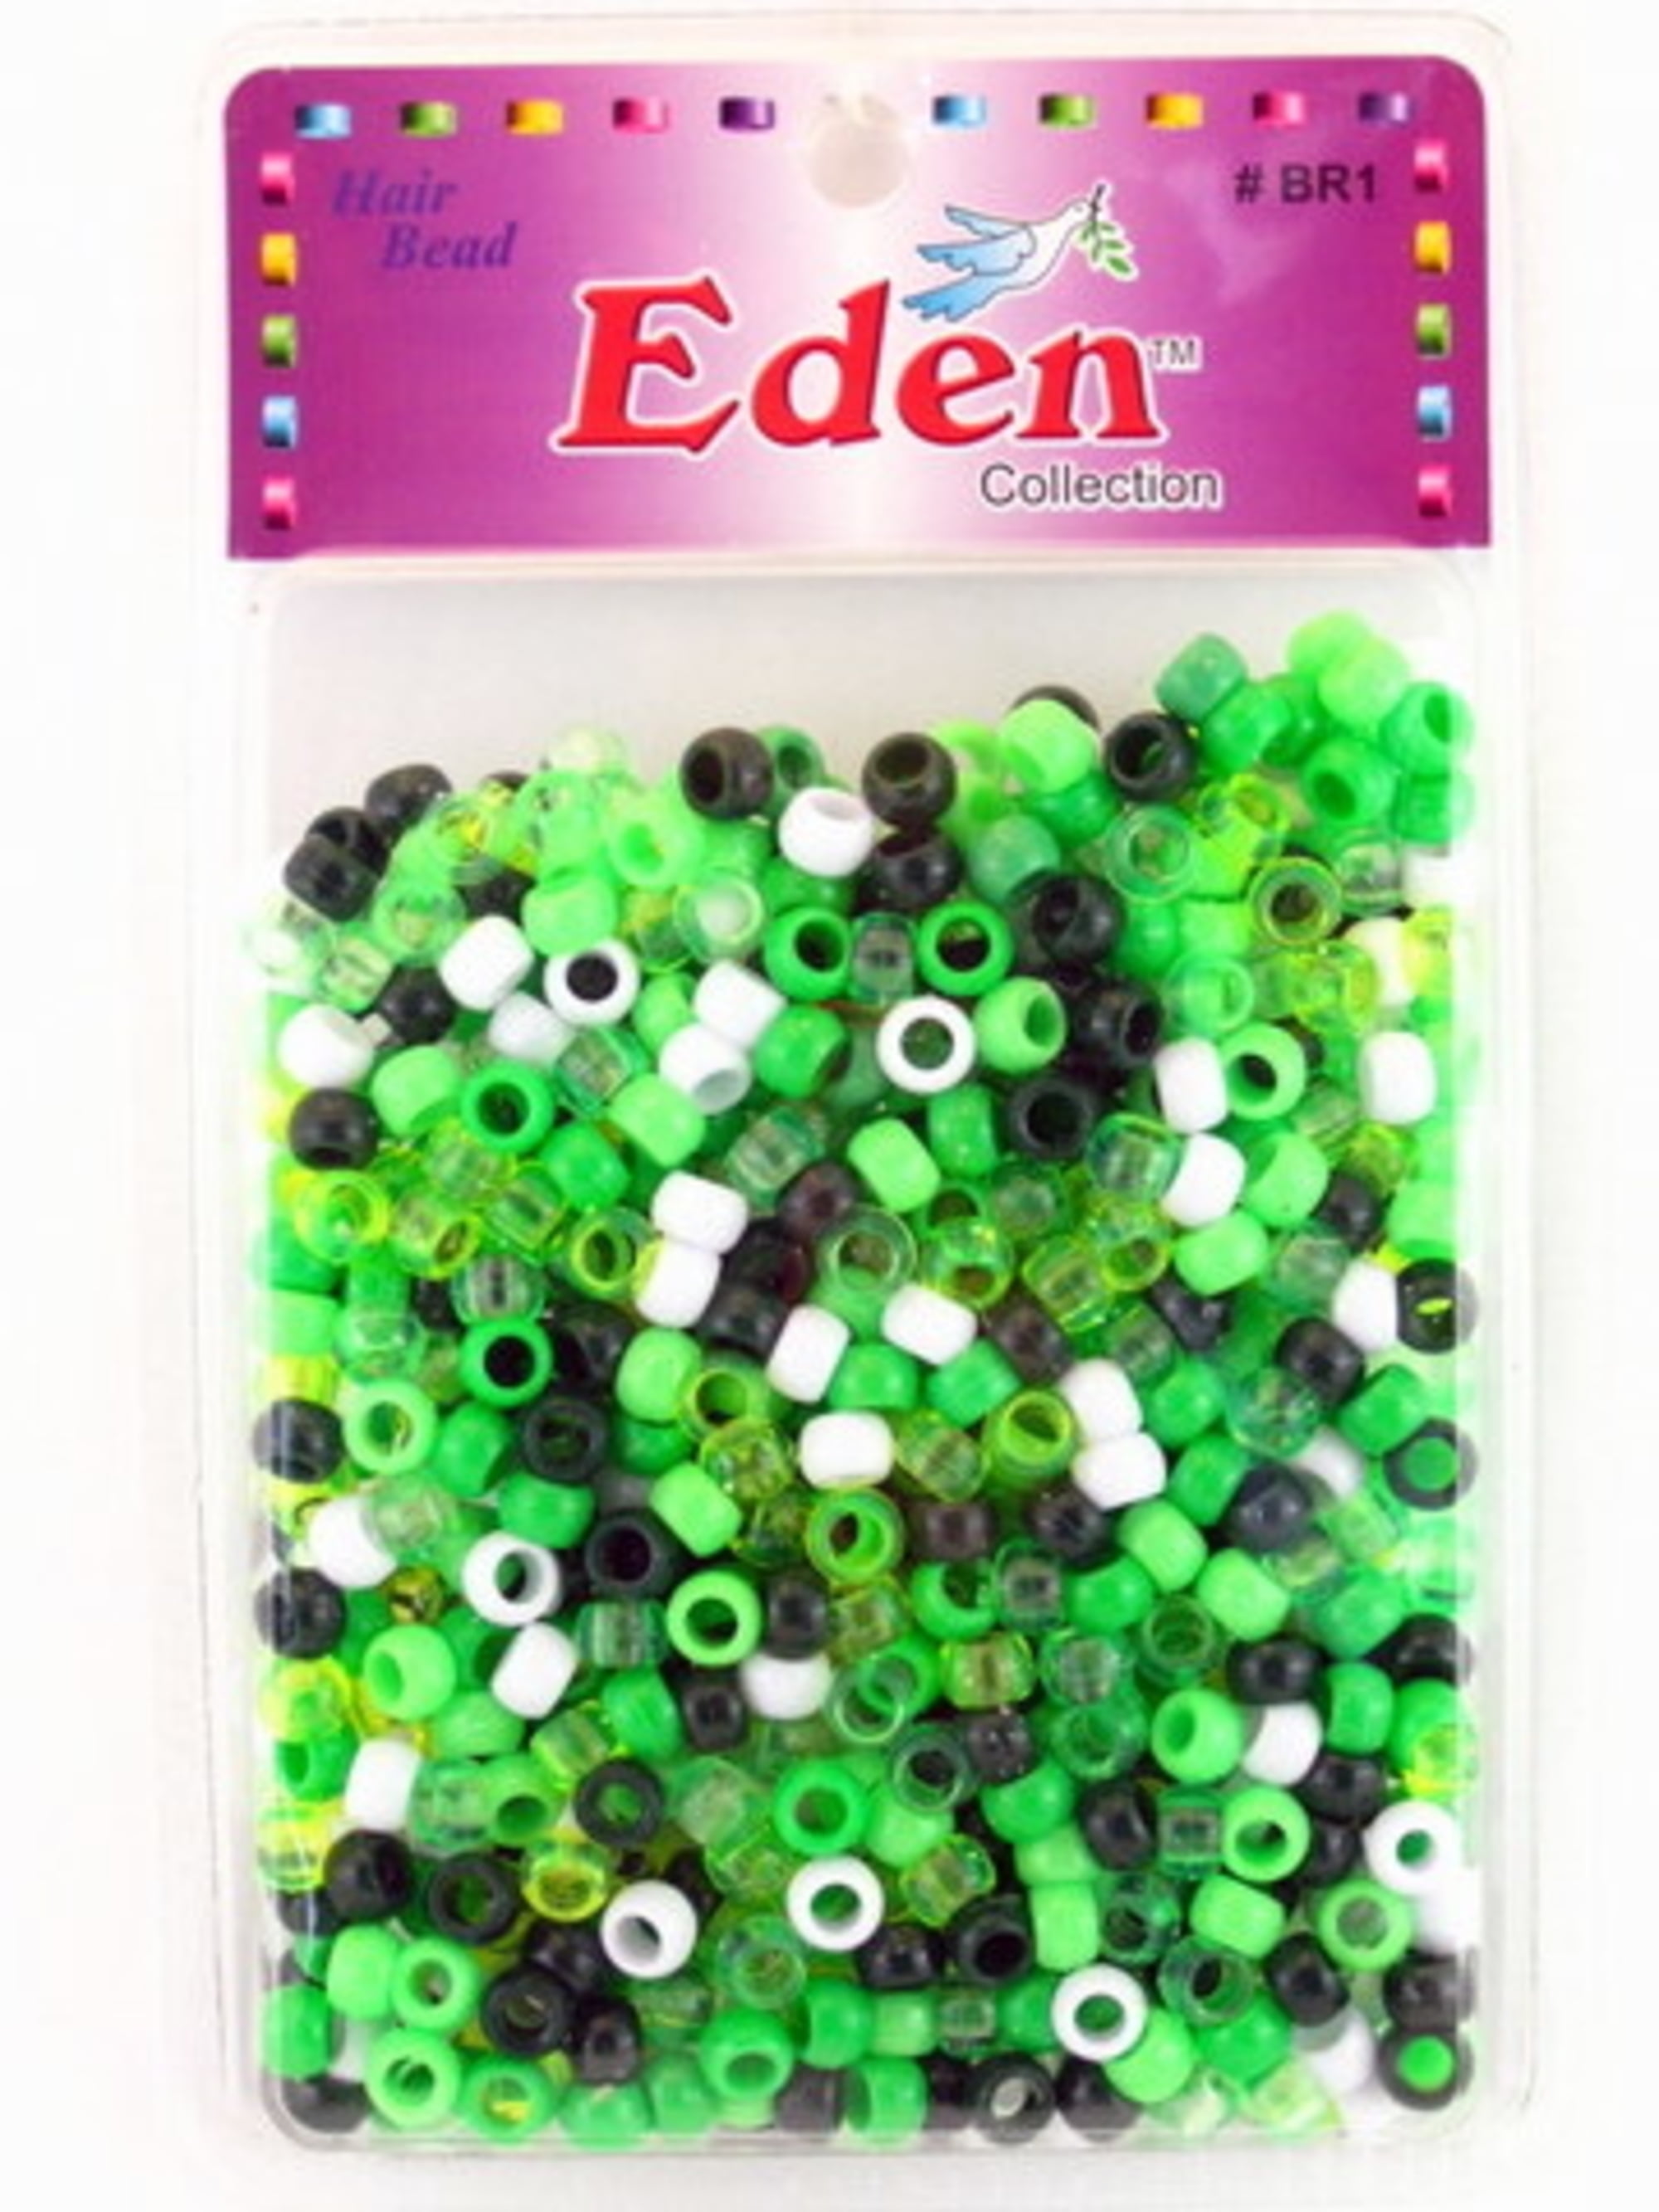 Eden Unisex Pony Hair Braiding or Plastic Crafting Beads - Approximately  700 Pcs. (Pink Mix)